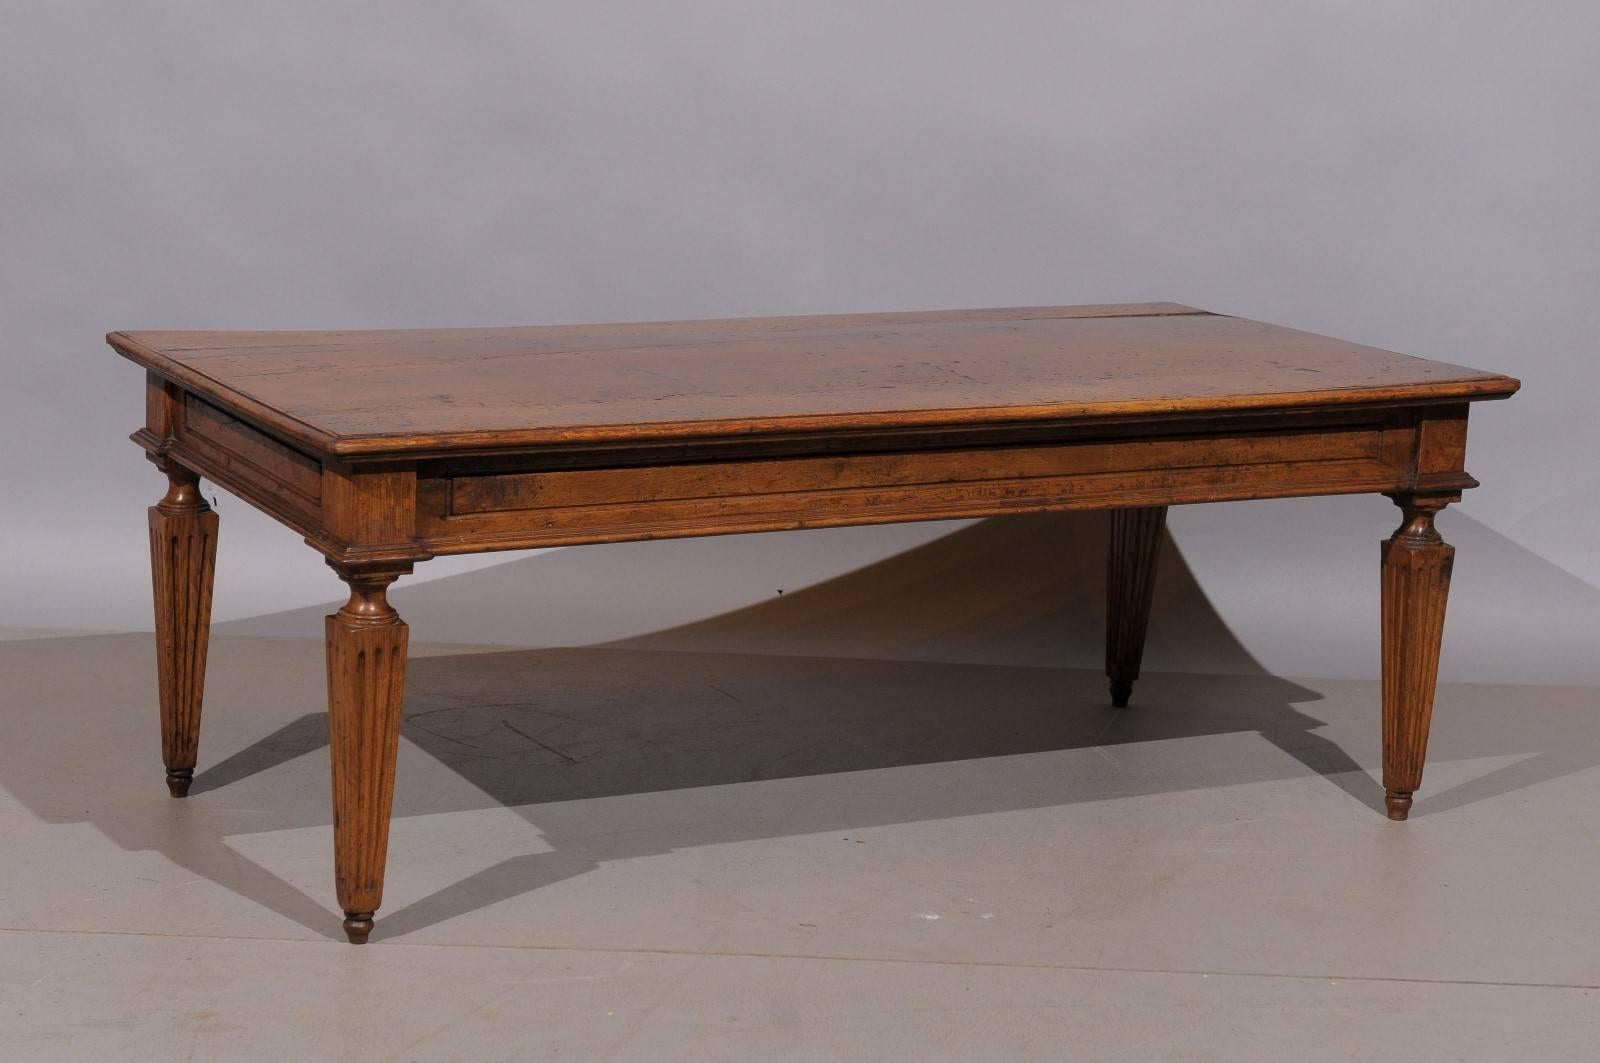 An Italian neoclassical style walnut coffee table with fluted carved tapered legs.
   
   